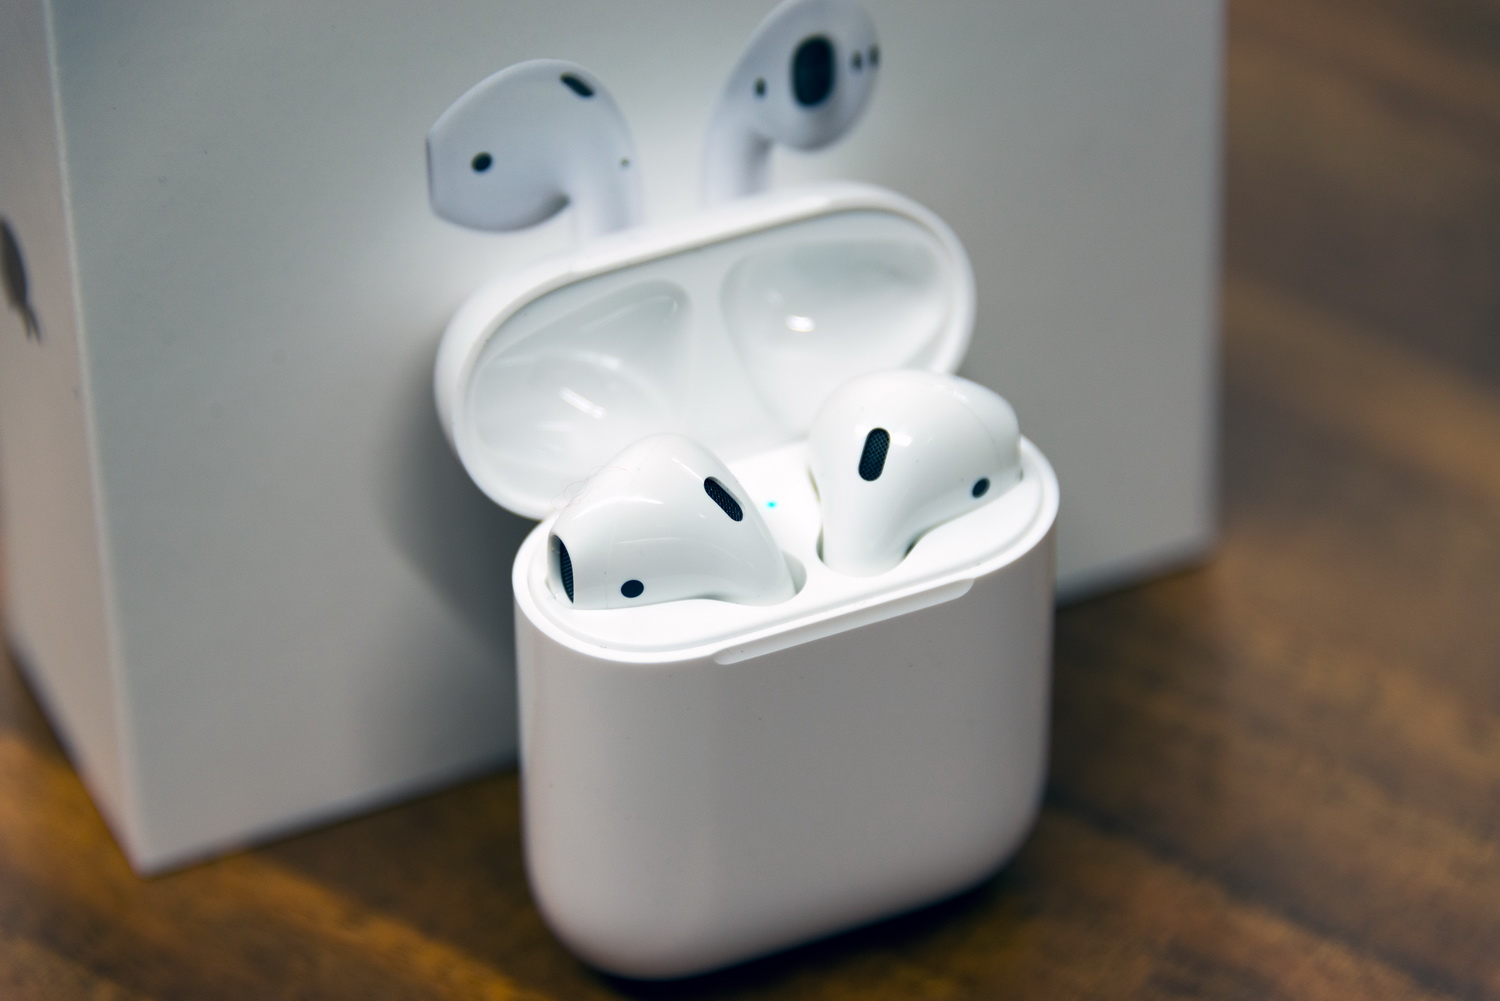 Apple AirPods sold out virtually everywhere until 2018